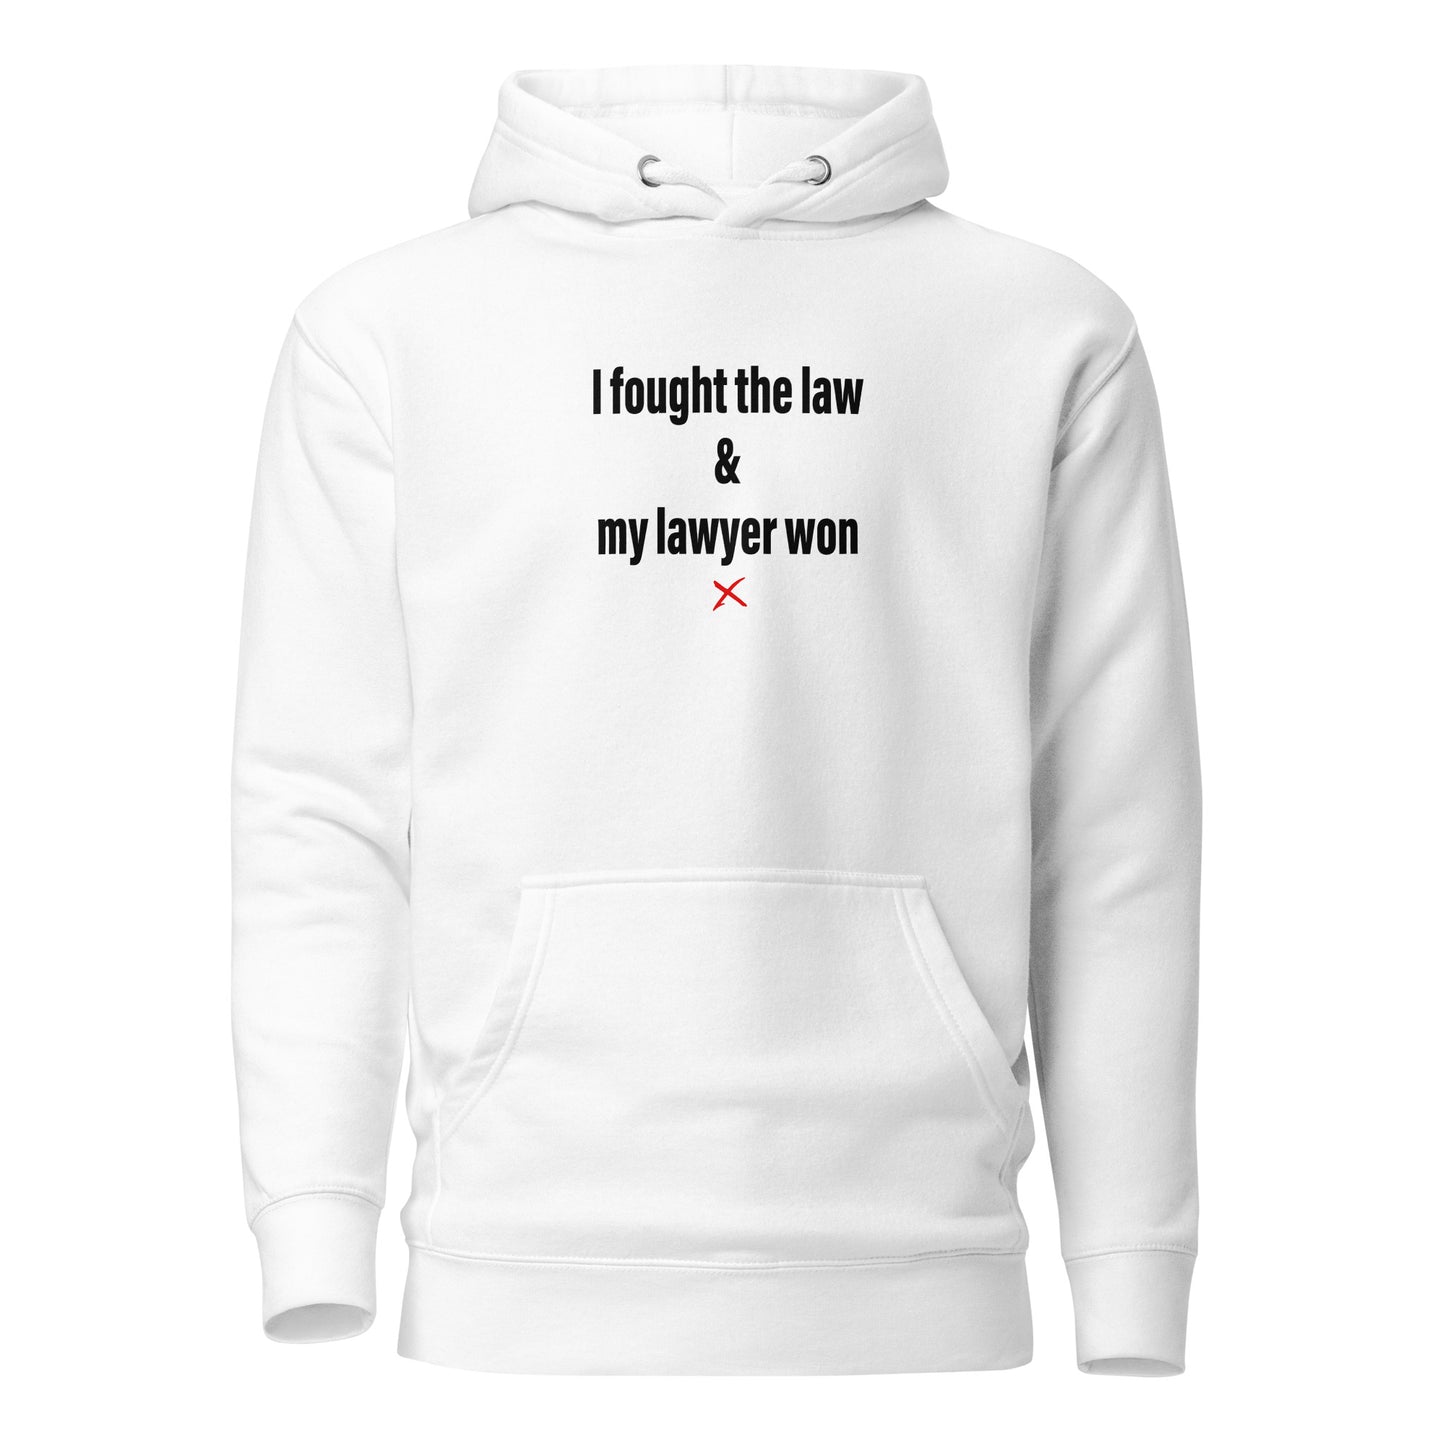 I fought the law & my lawyer won - Hoodie